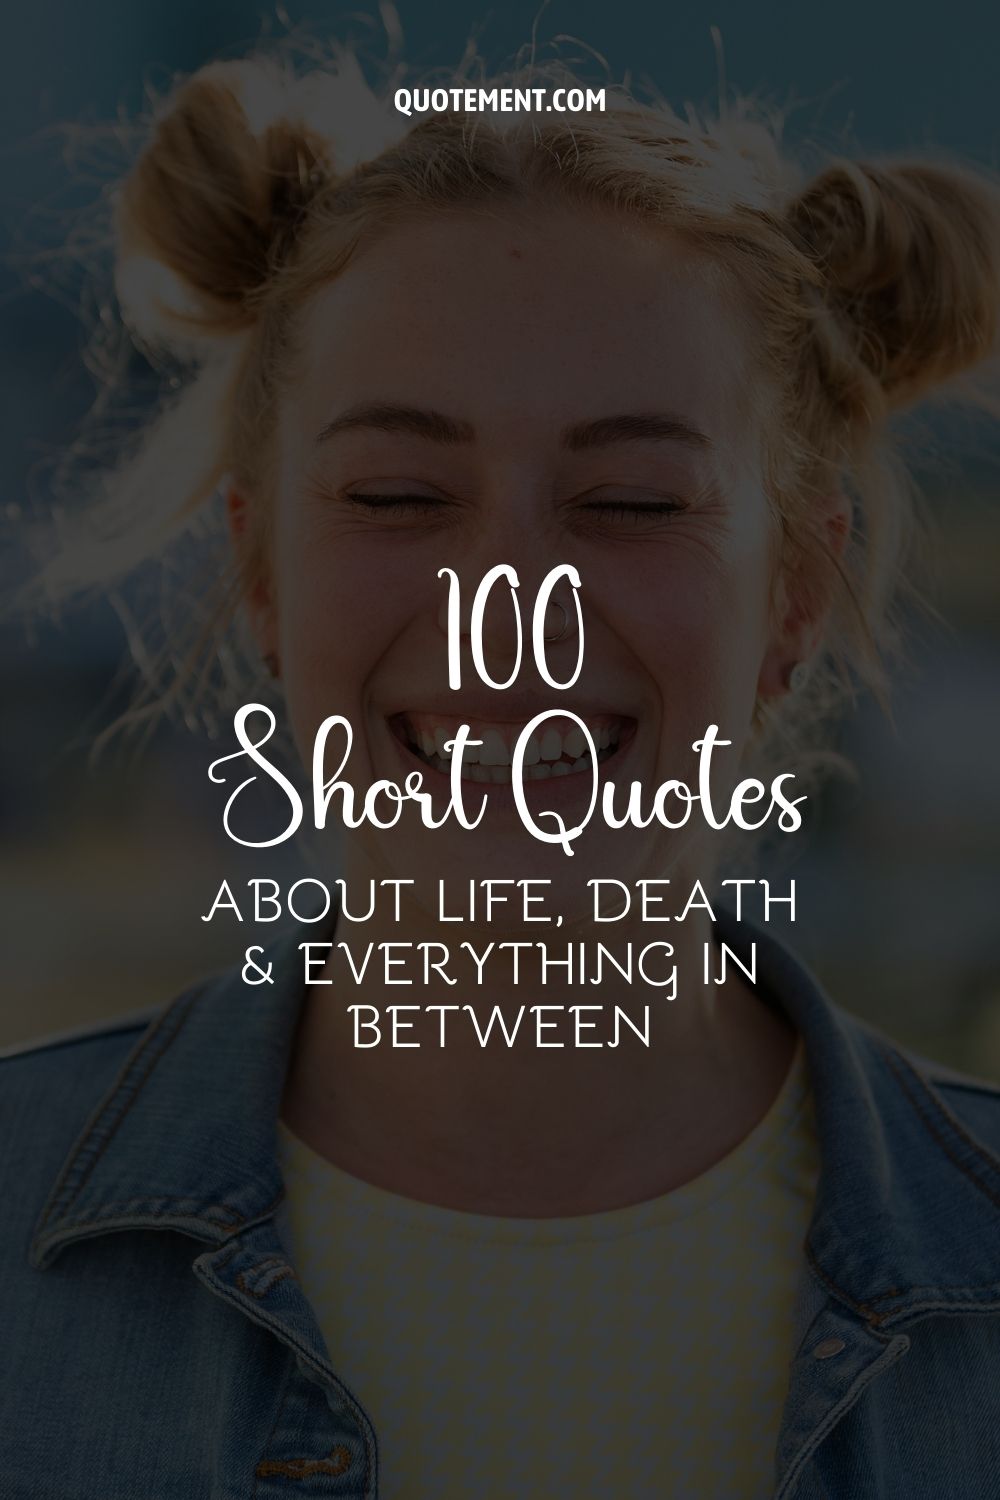 100 Short Quotes About Life, Death & Everything In Between
